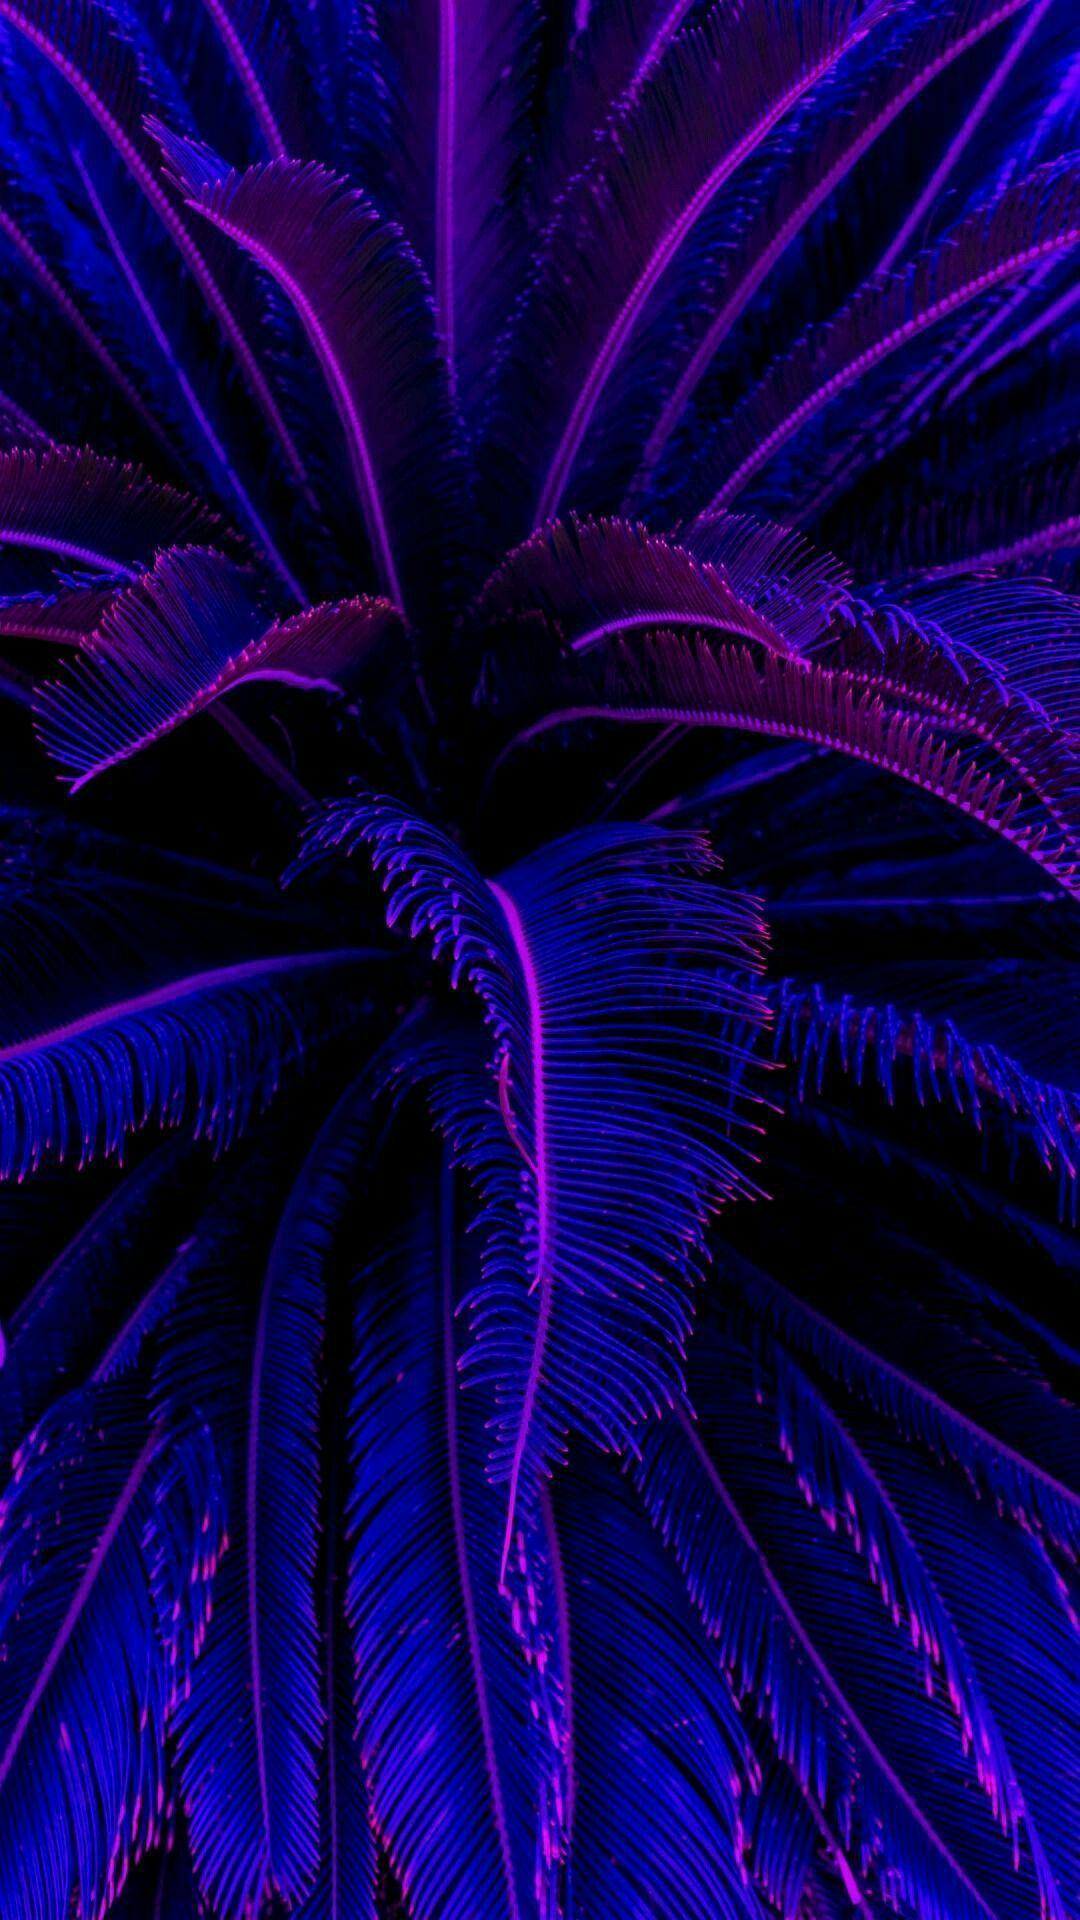 Blue and Purple Aesthetic Wallpapers - Top Free Blue and Purple